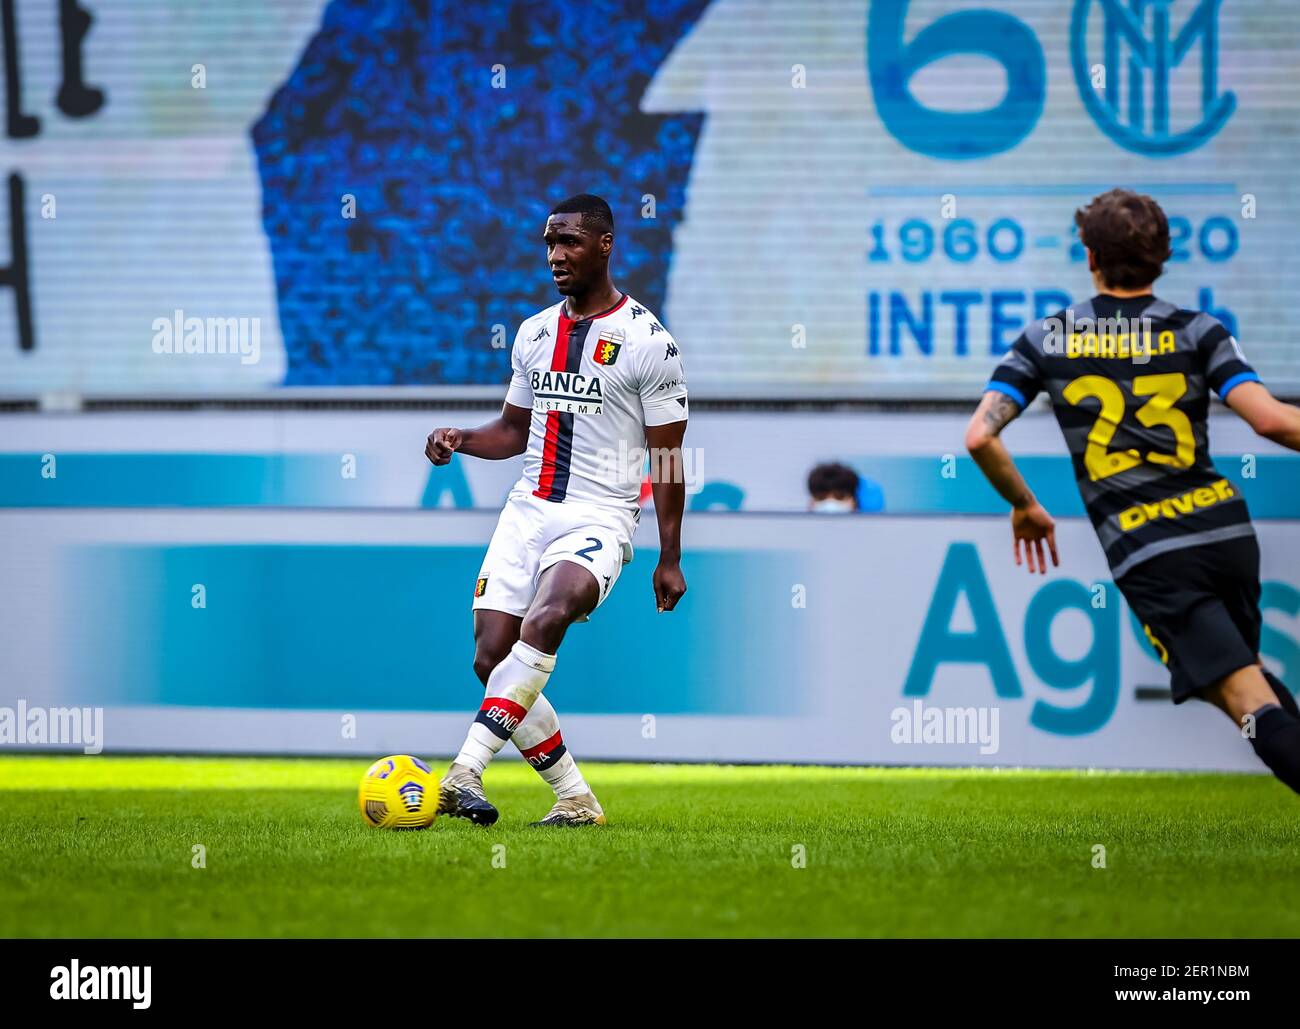 Milan, Italy. 28th Feb, 2021. Cristian Zapata of Genoa CFC during FC Internazionale vs Genoa CFC, Italian football Serie A match in Milan, Italy, February 28 2021 Credit: Independent Photo Agency/Alamy Live News Stock Photo